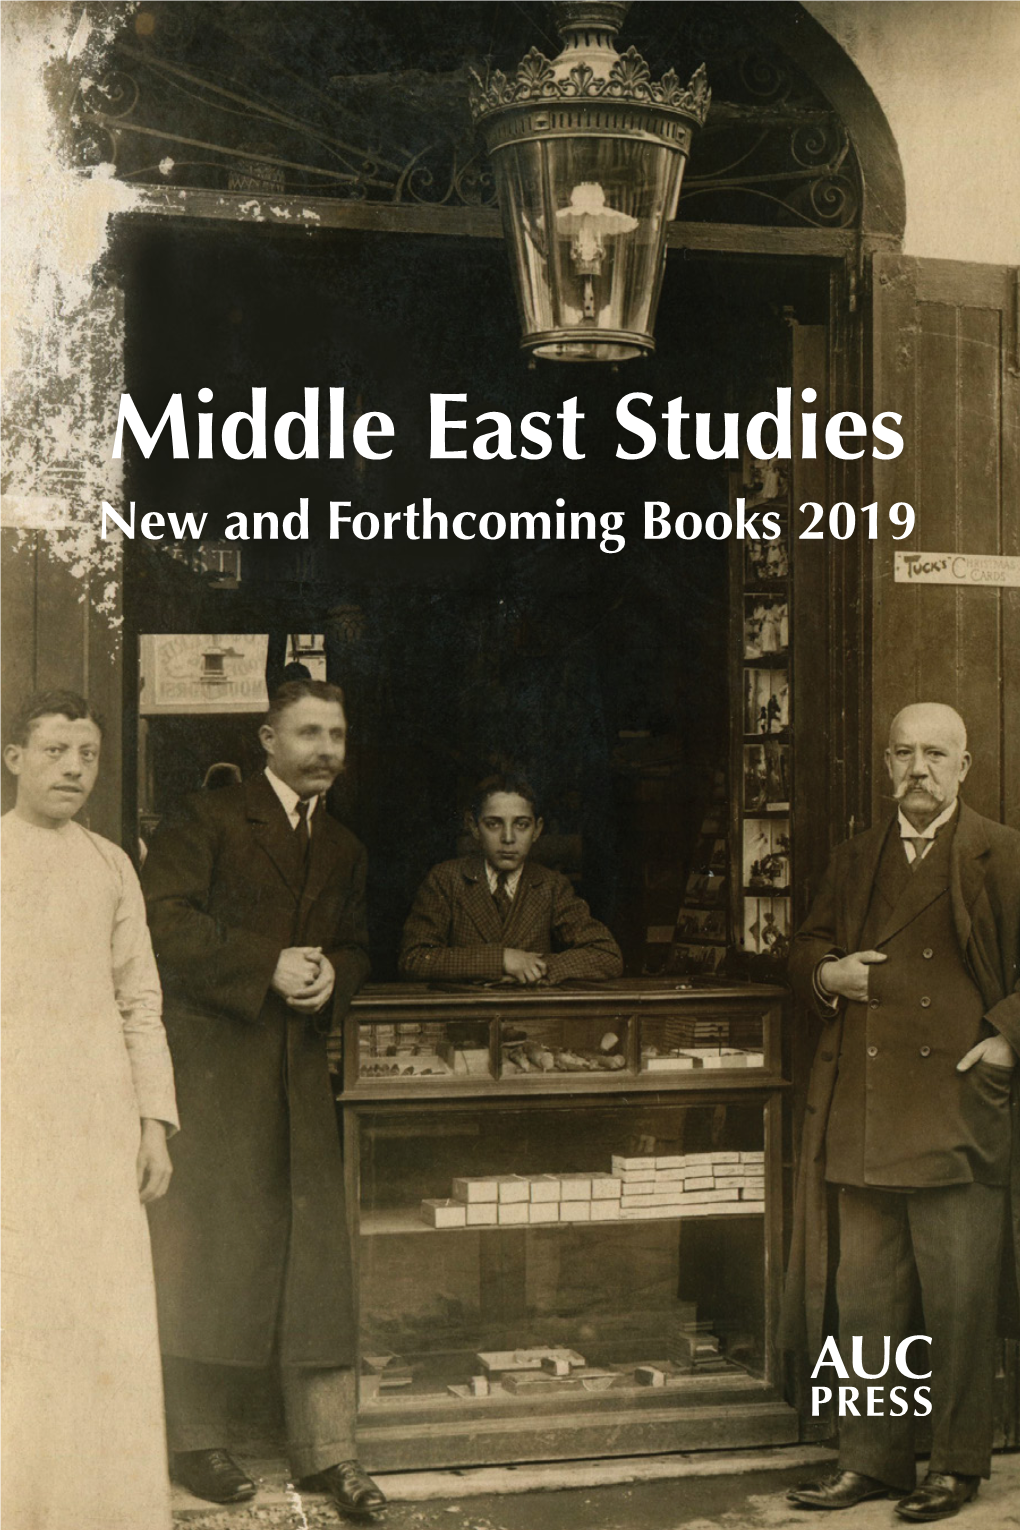 Middle East Studies New and Forthcoming Books 2019